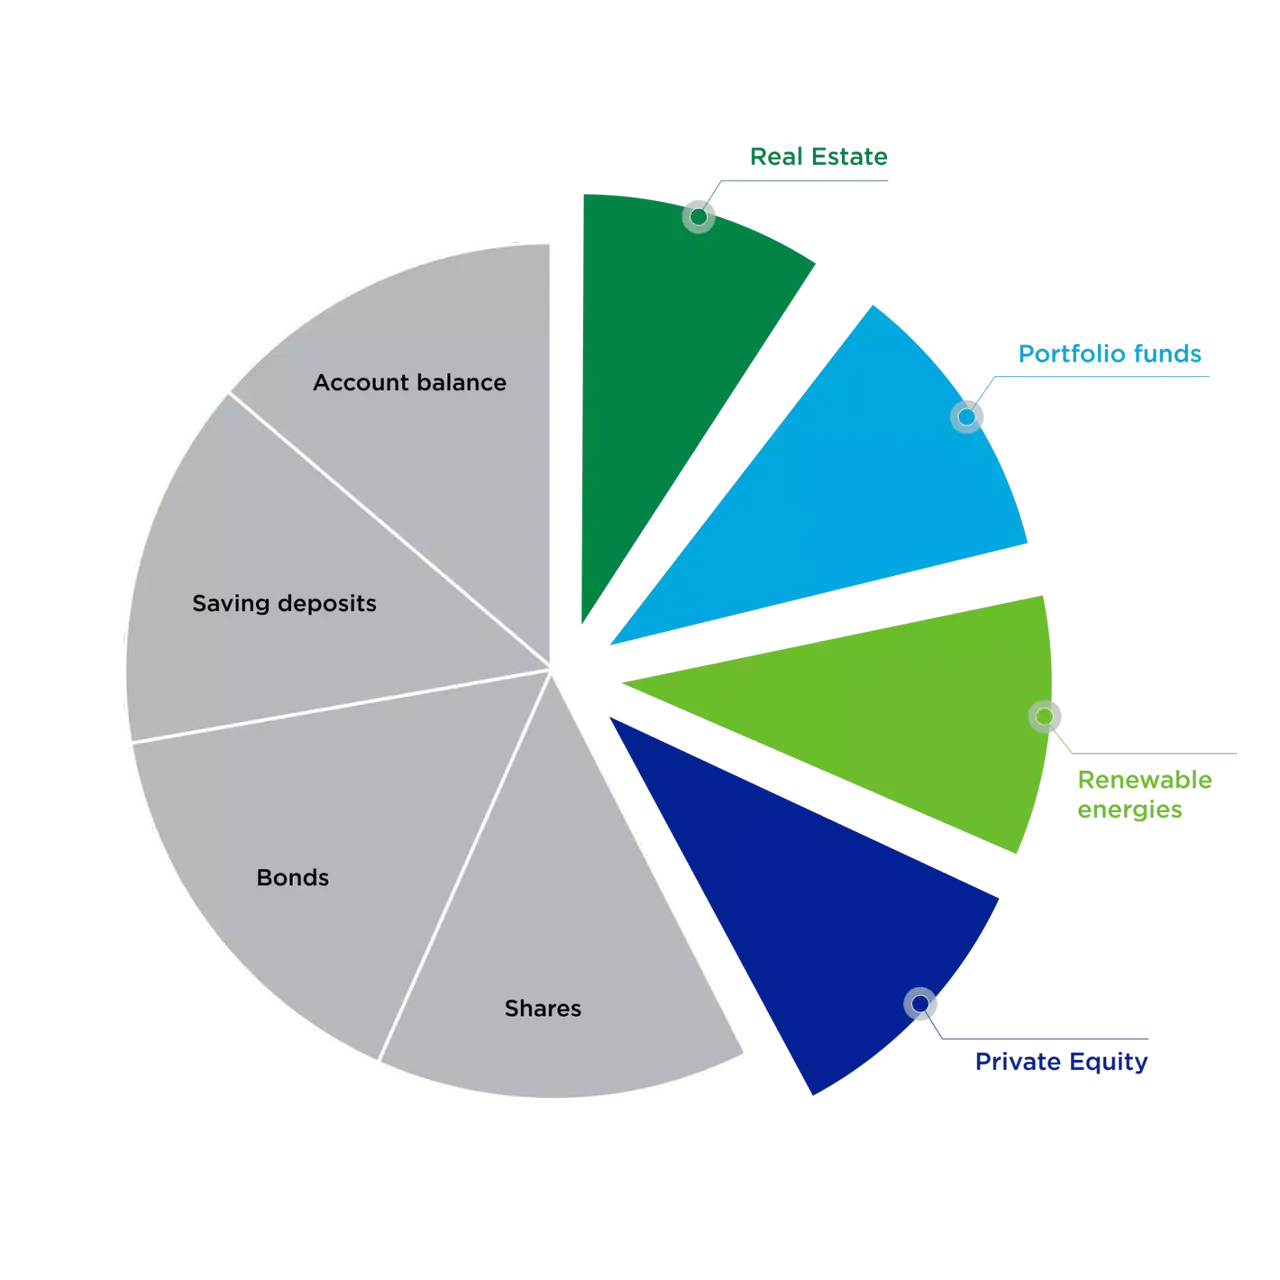 klimaVest: The chart shows the different asset classes in a pie chart. Highlighted are real estate, portfolio funds, renewable energies and private equity.